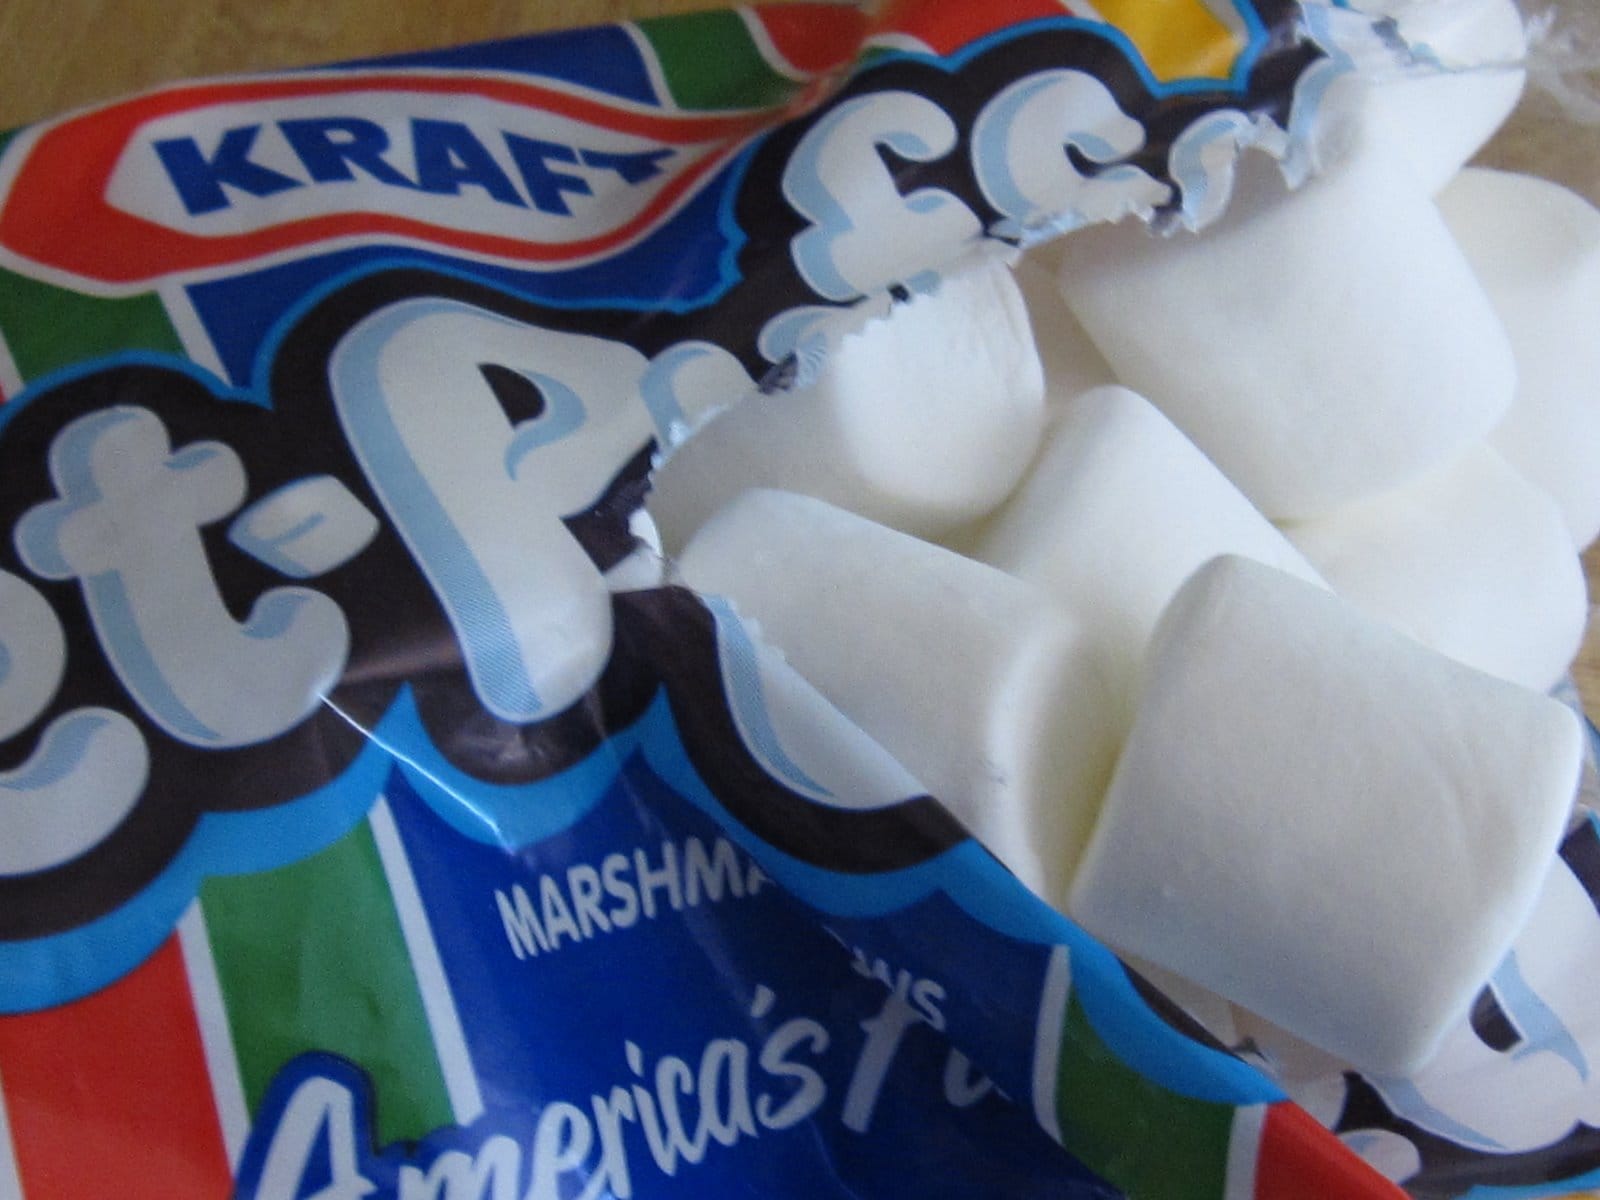 A package of Jet-Puffed marshmallows ripped open